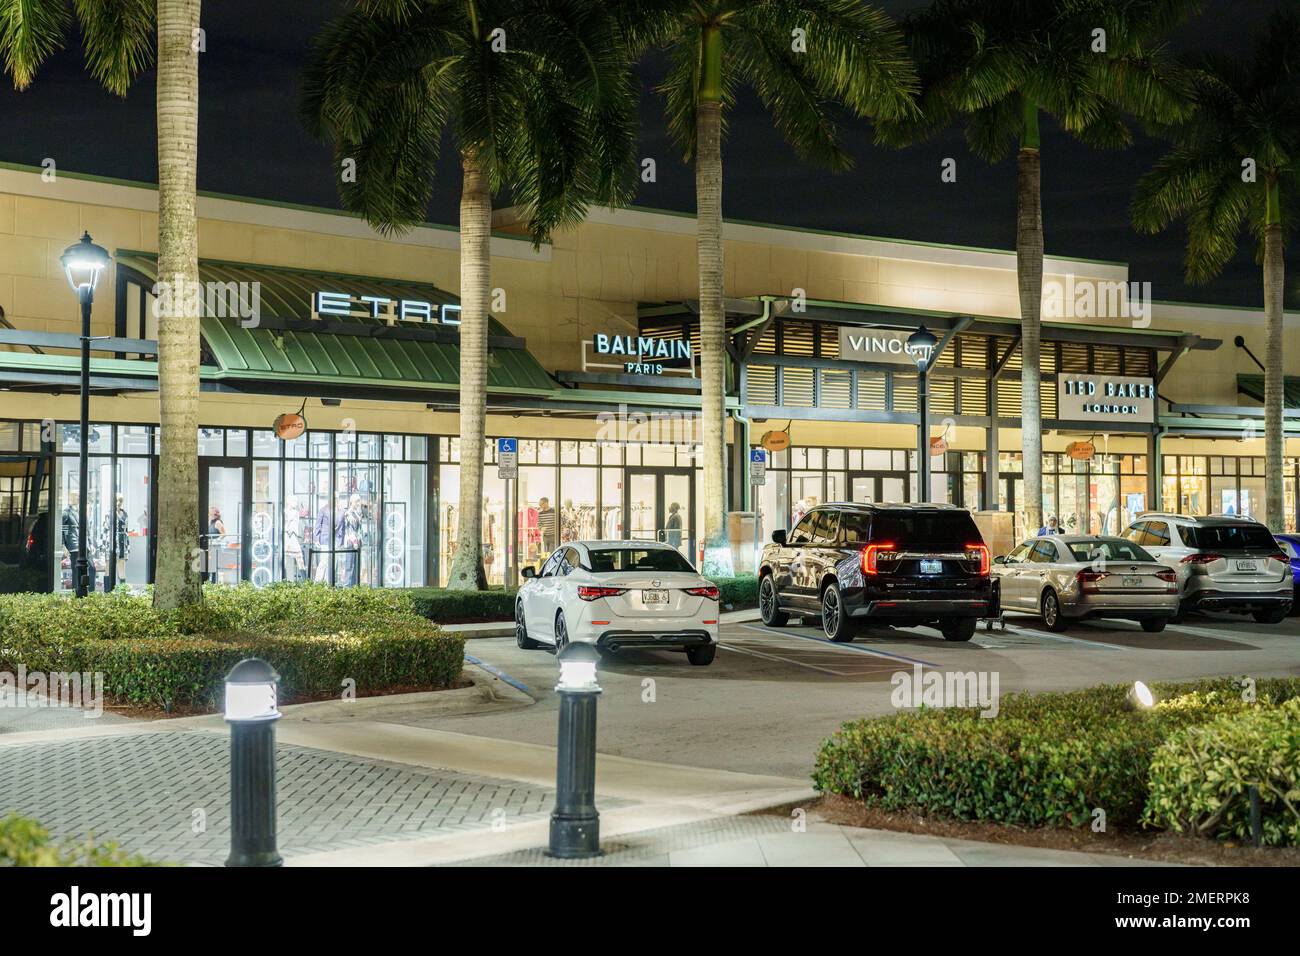 The Colonnade Outlets at Sawgrass Mills Welcomes Three Luxury